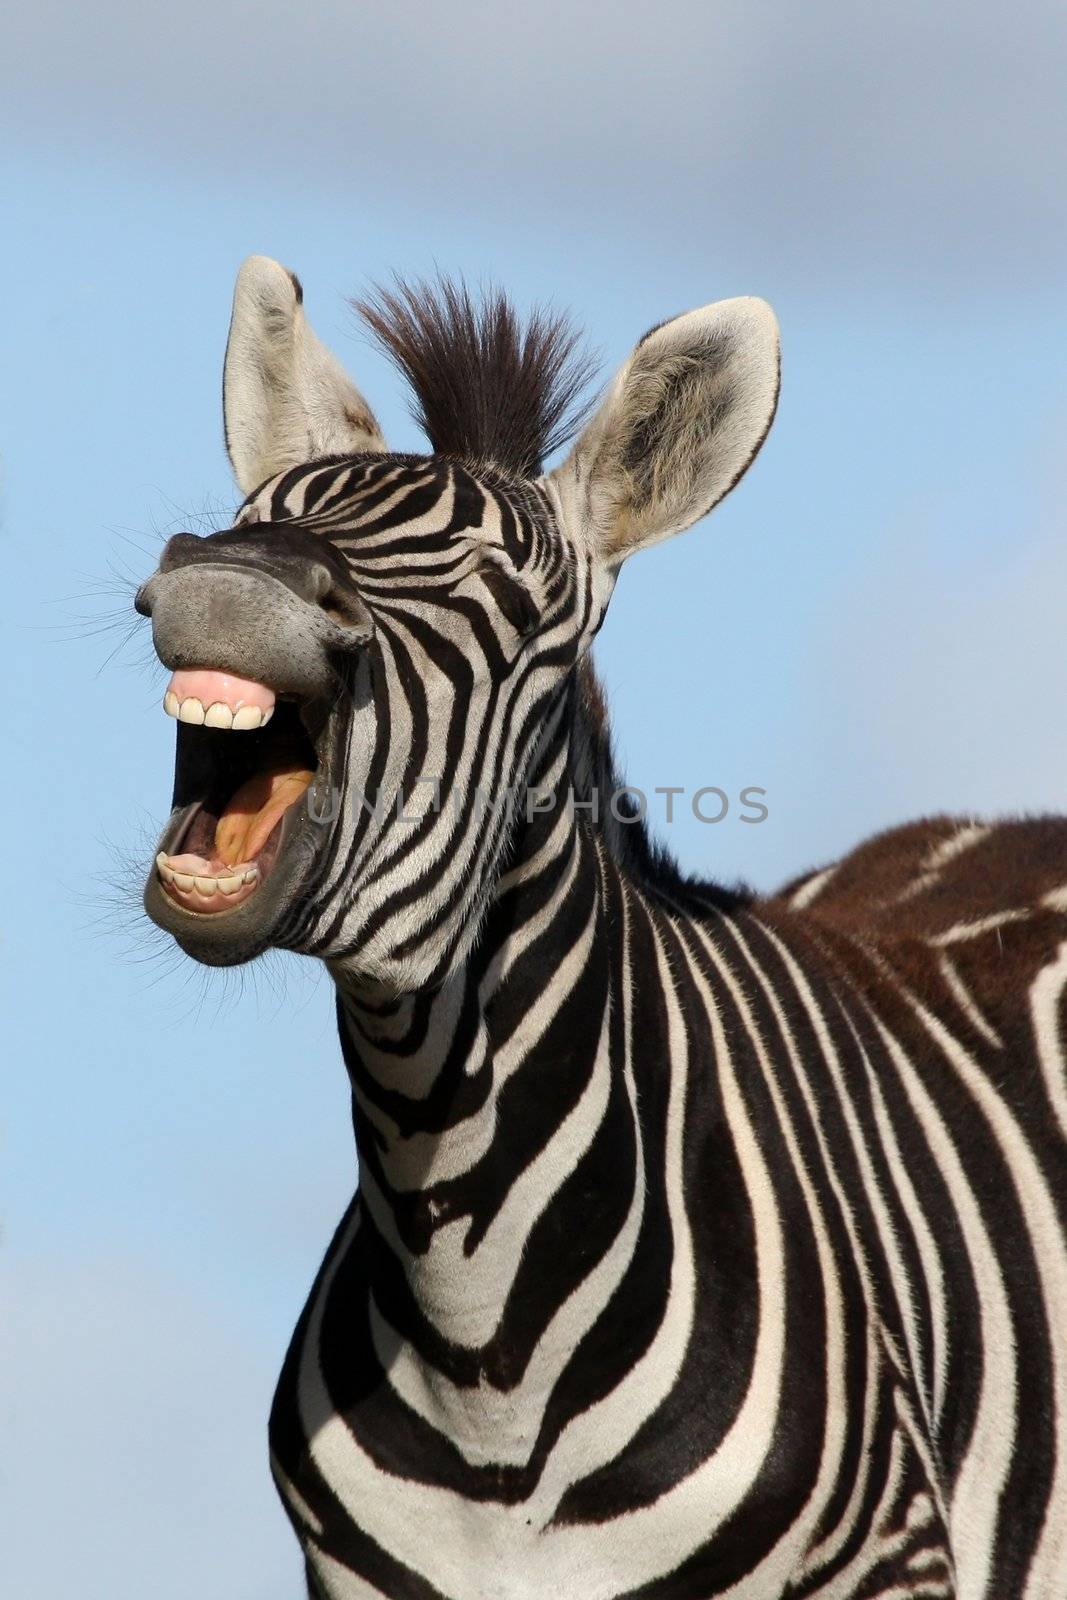 Zebra with mouth open looking like it is laughing